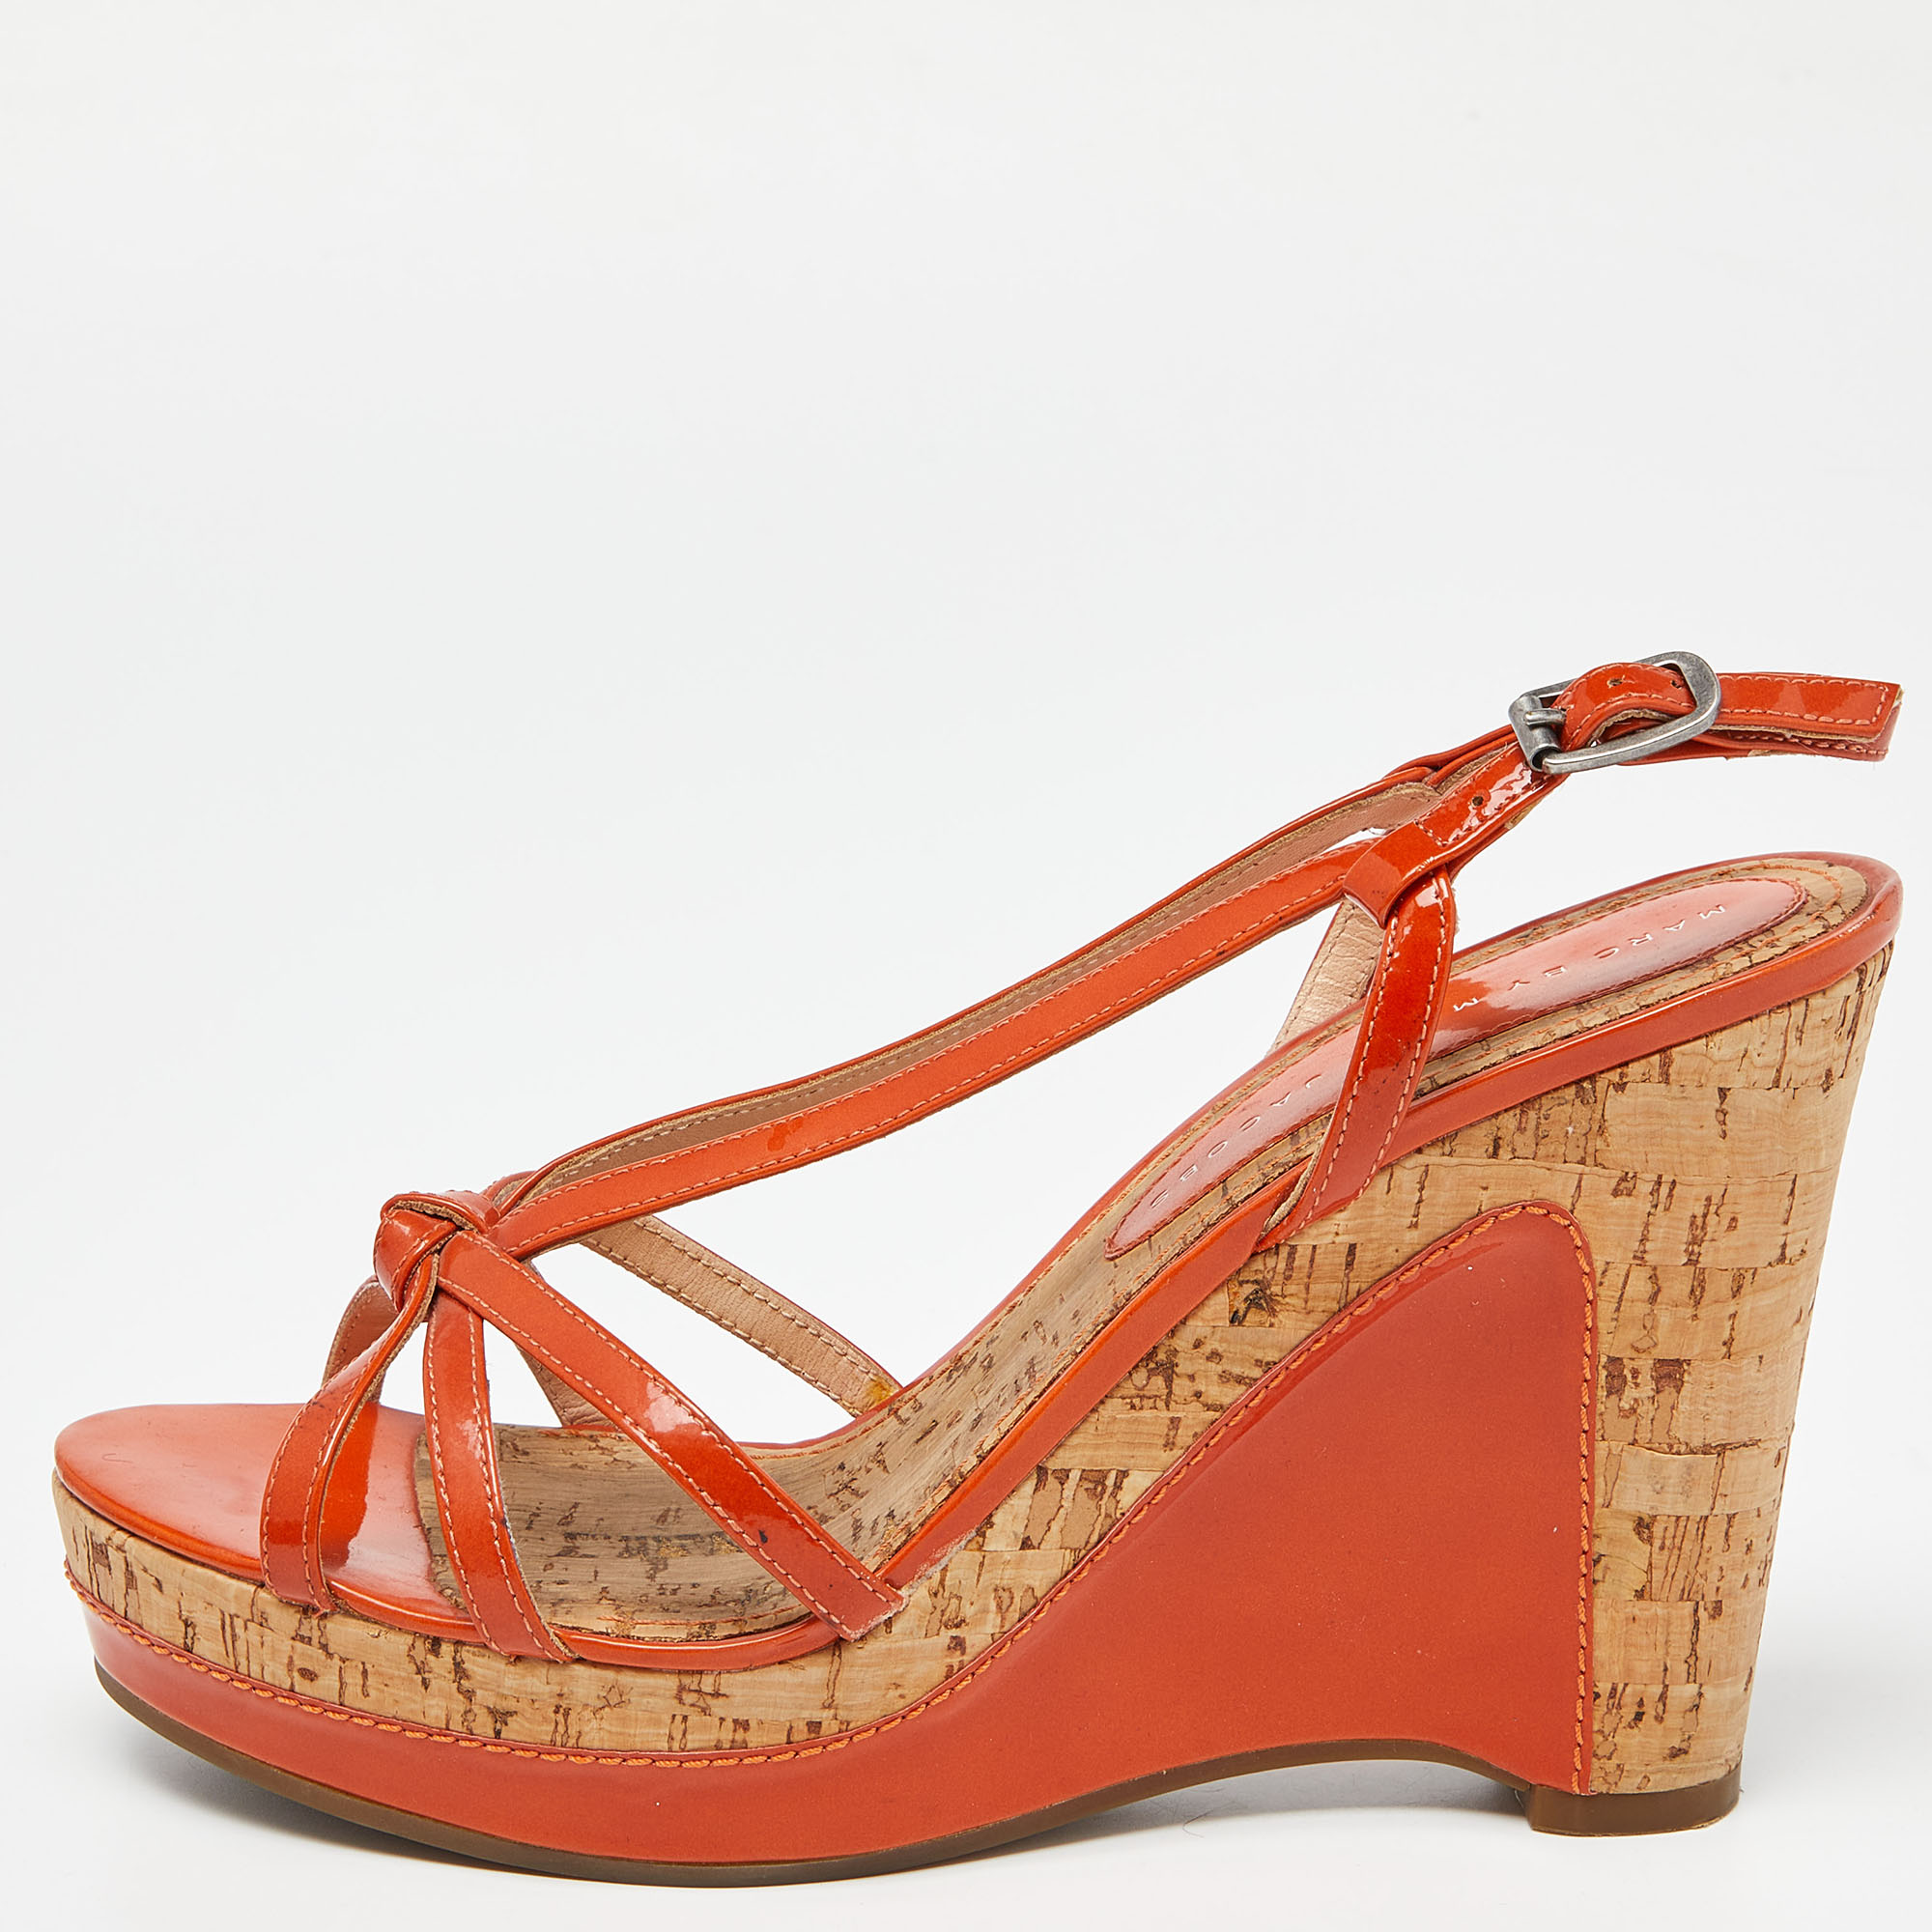 Pre-owned Marc By Marc Jacobs Orange Patent Leather Cork Wedge Slingback Sandals Size 37.5